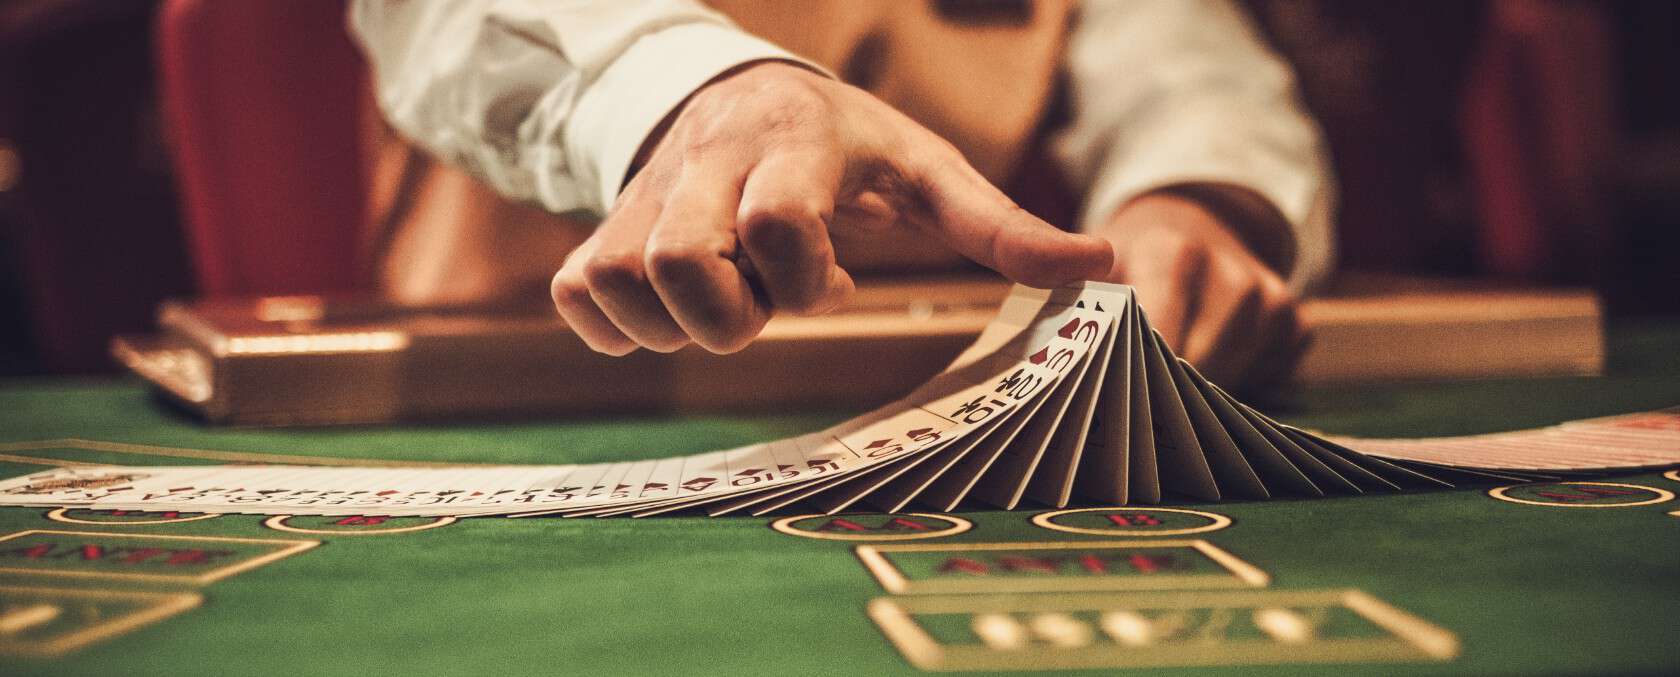 What actions of blackjack players lead to losses?